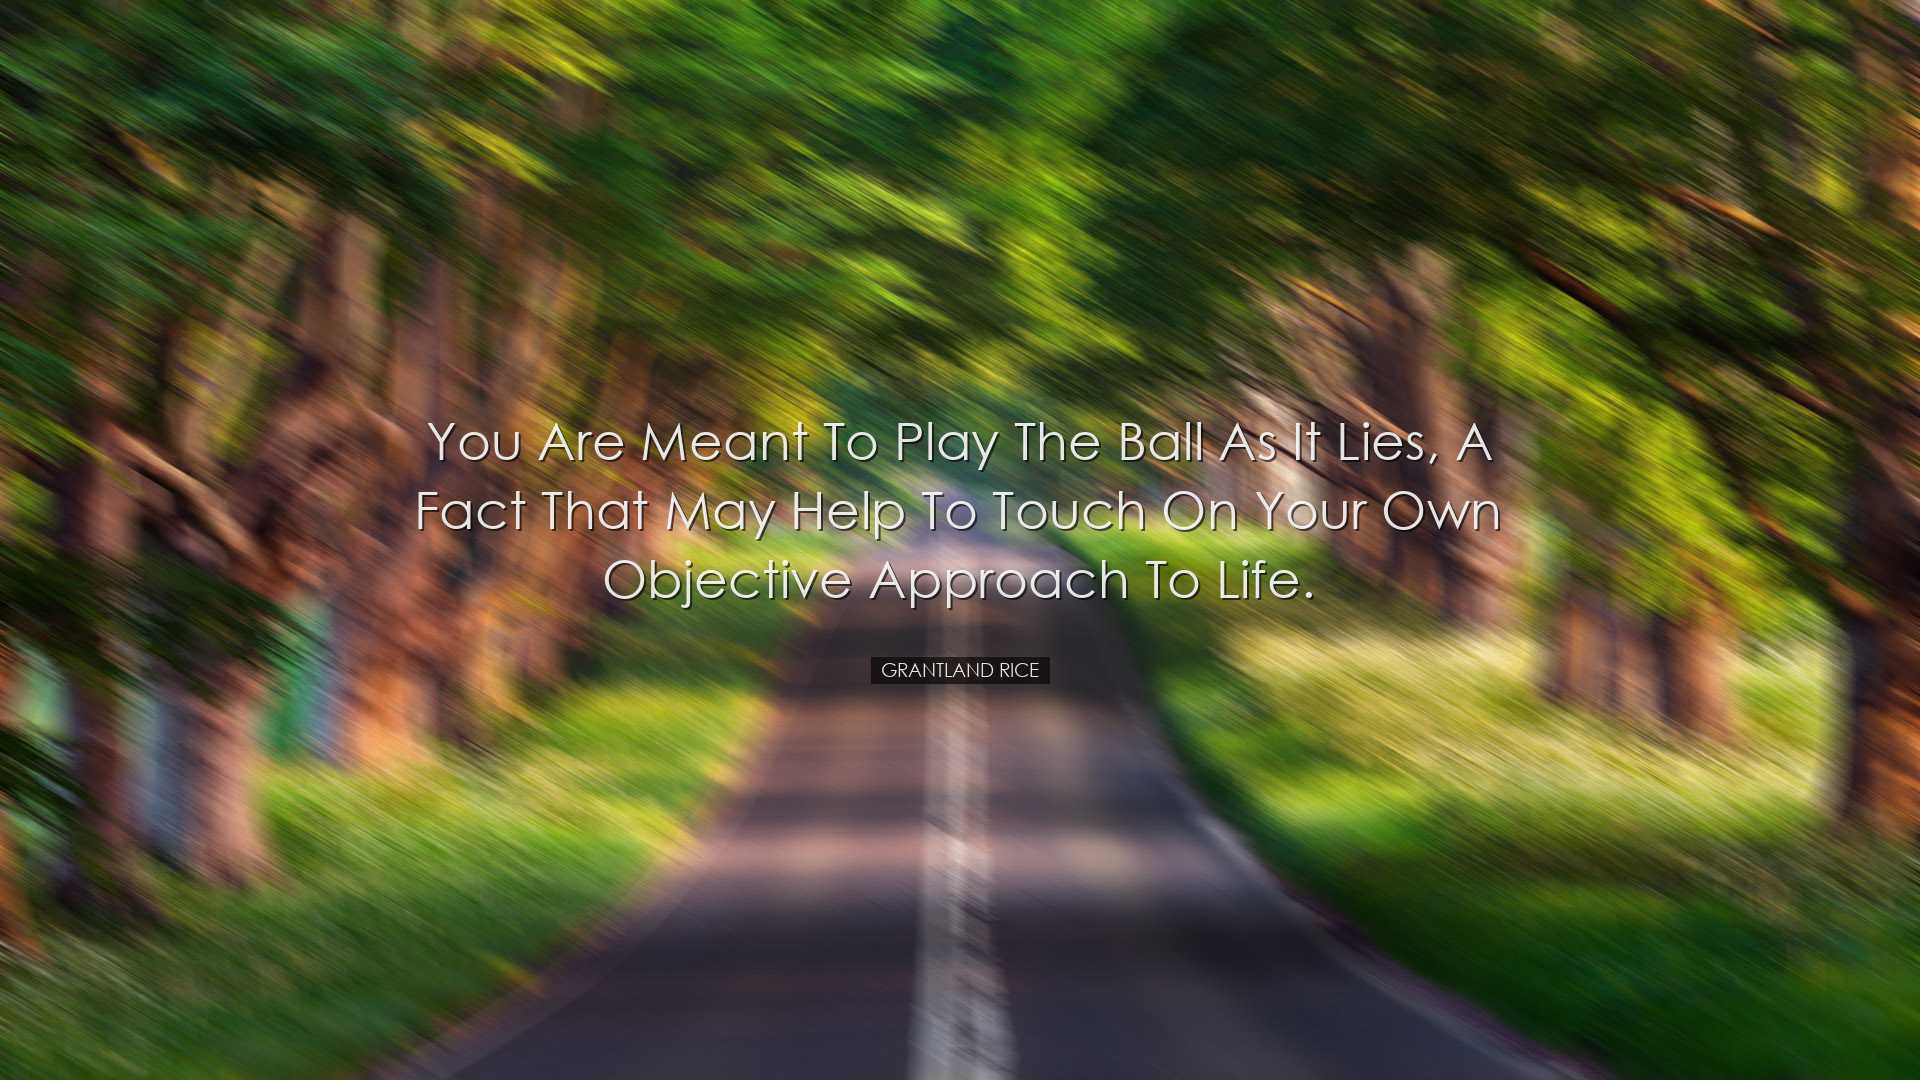 You are meant to play the ball as it lies, a fact that may help to